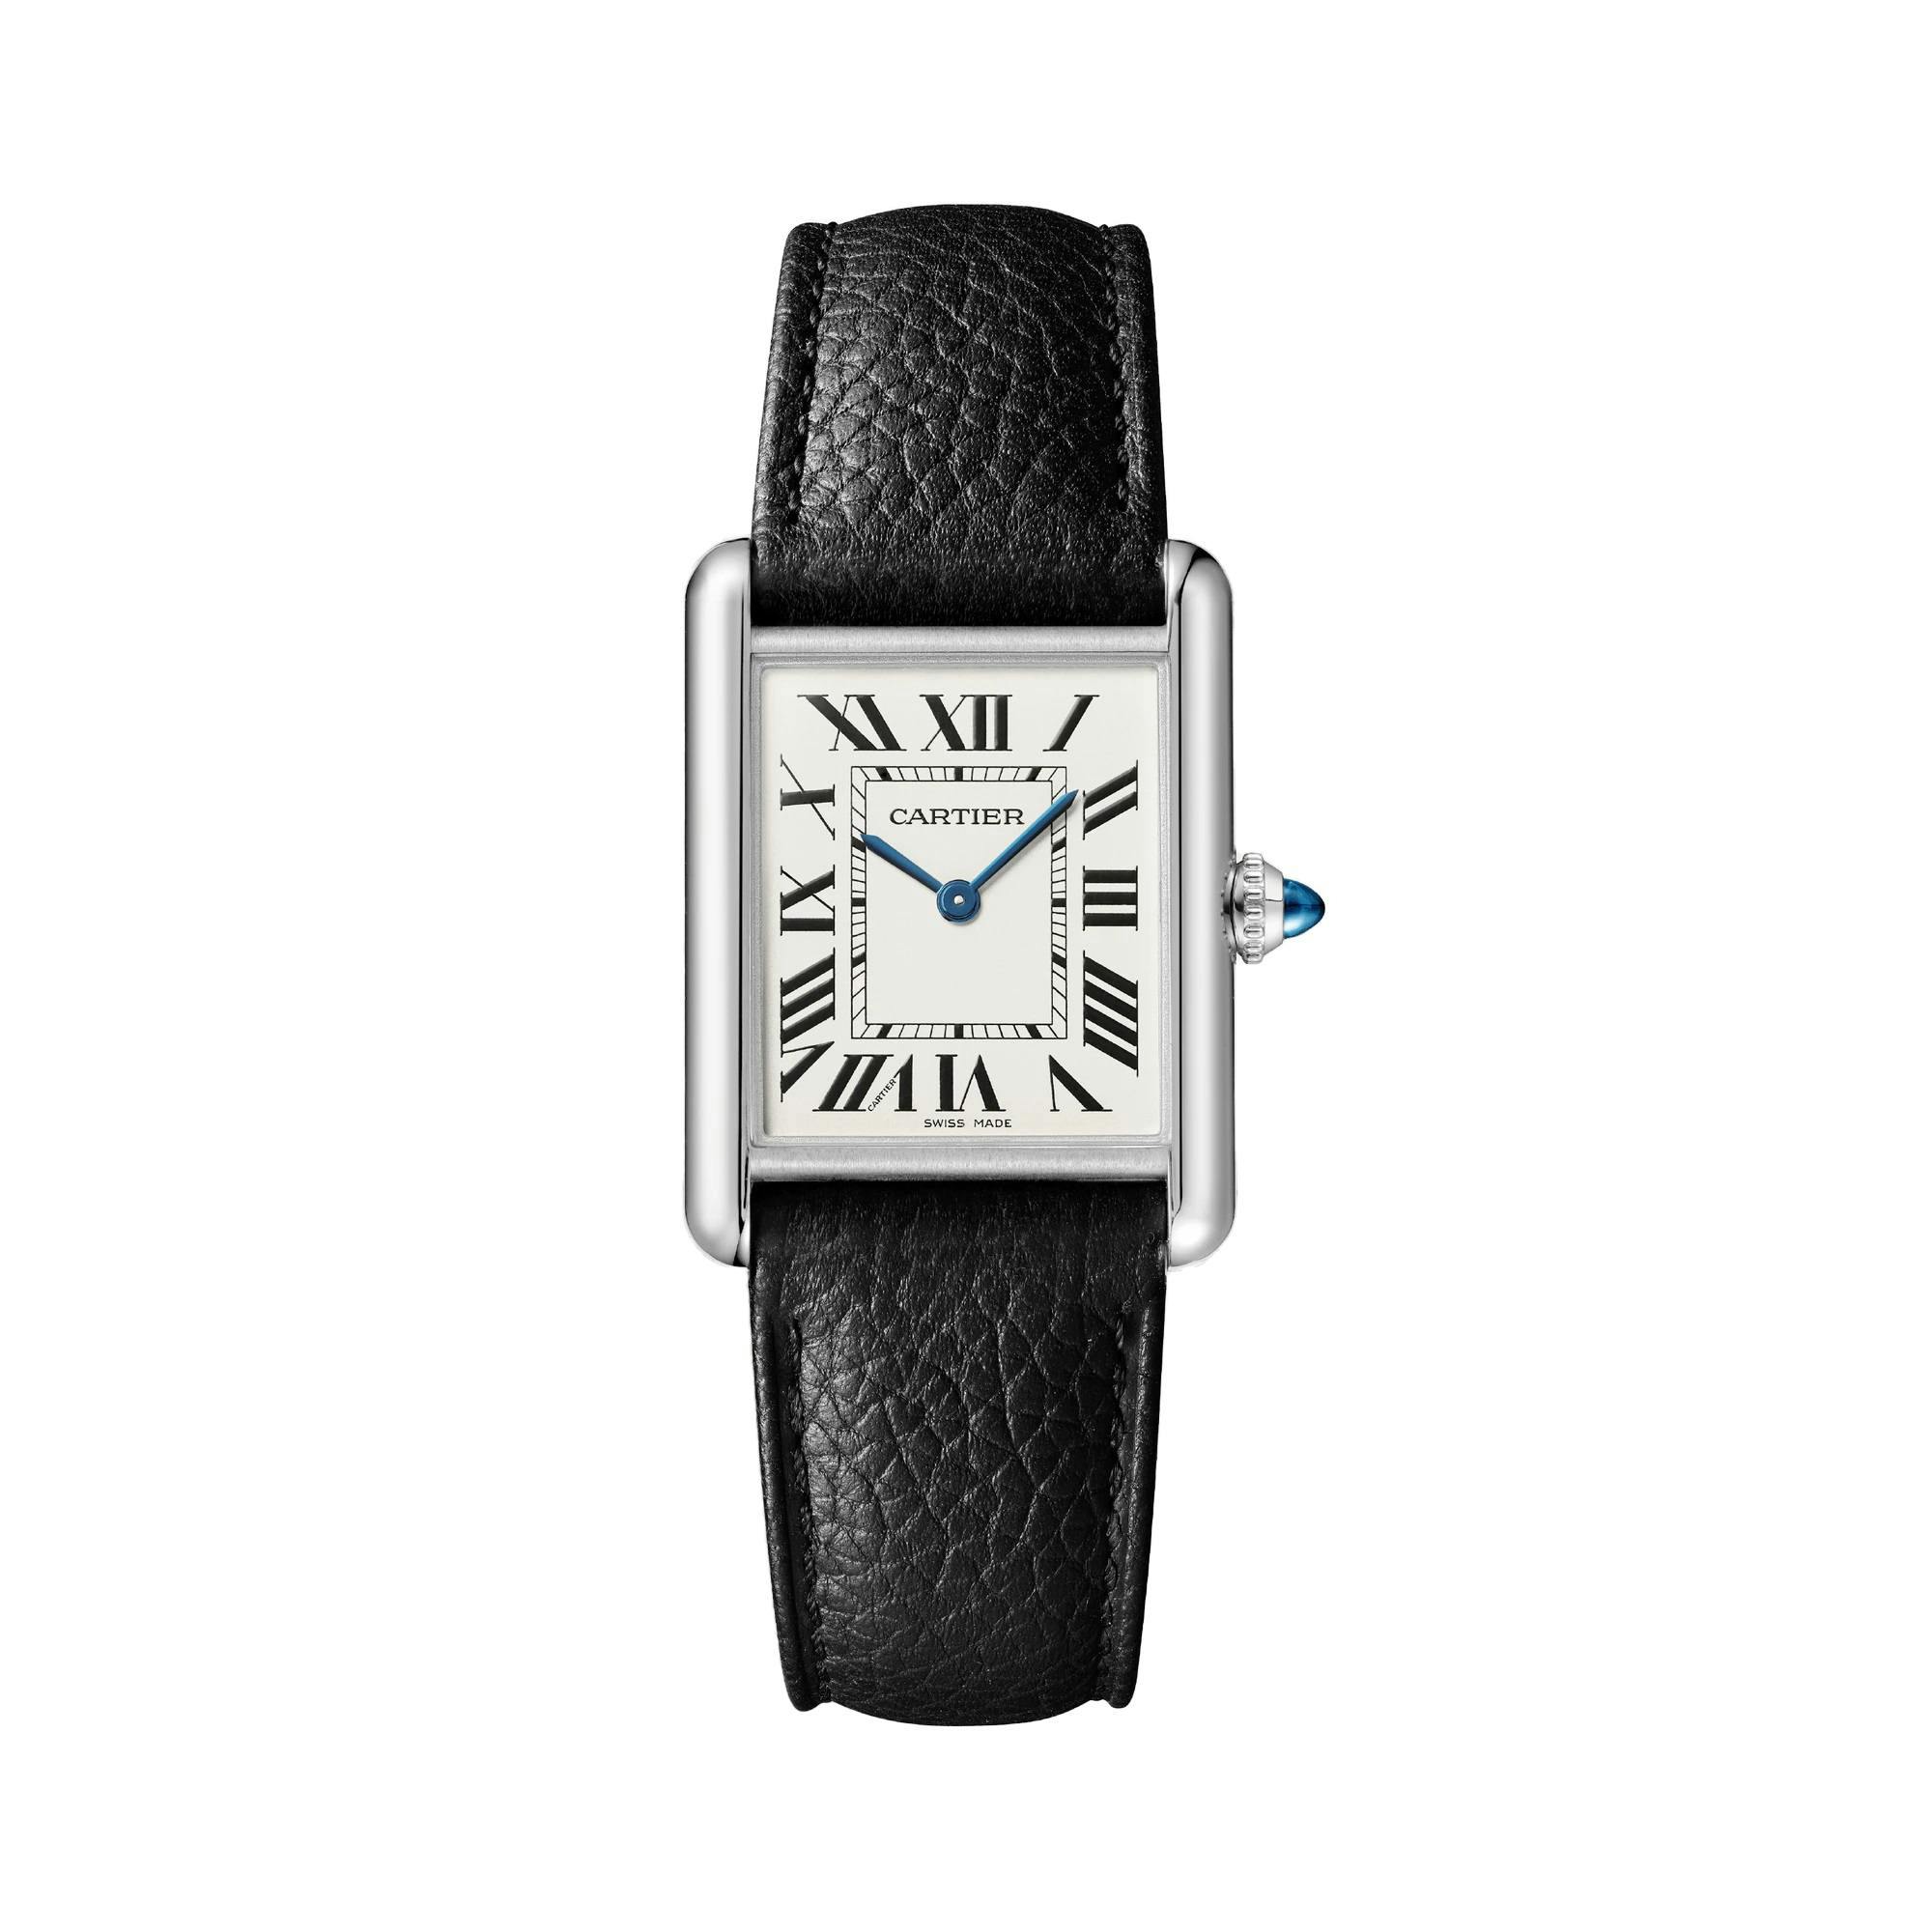 Cartier Tank Must Watch with Black Calfskin Strap, large model 1